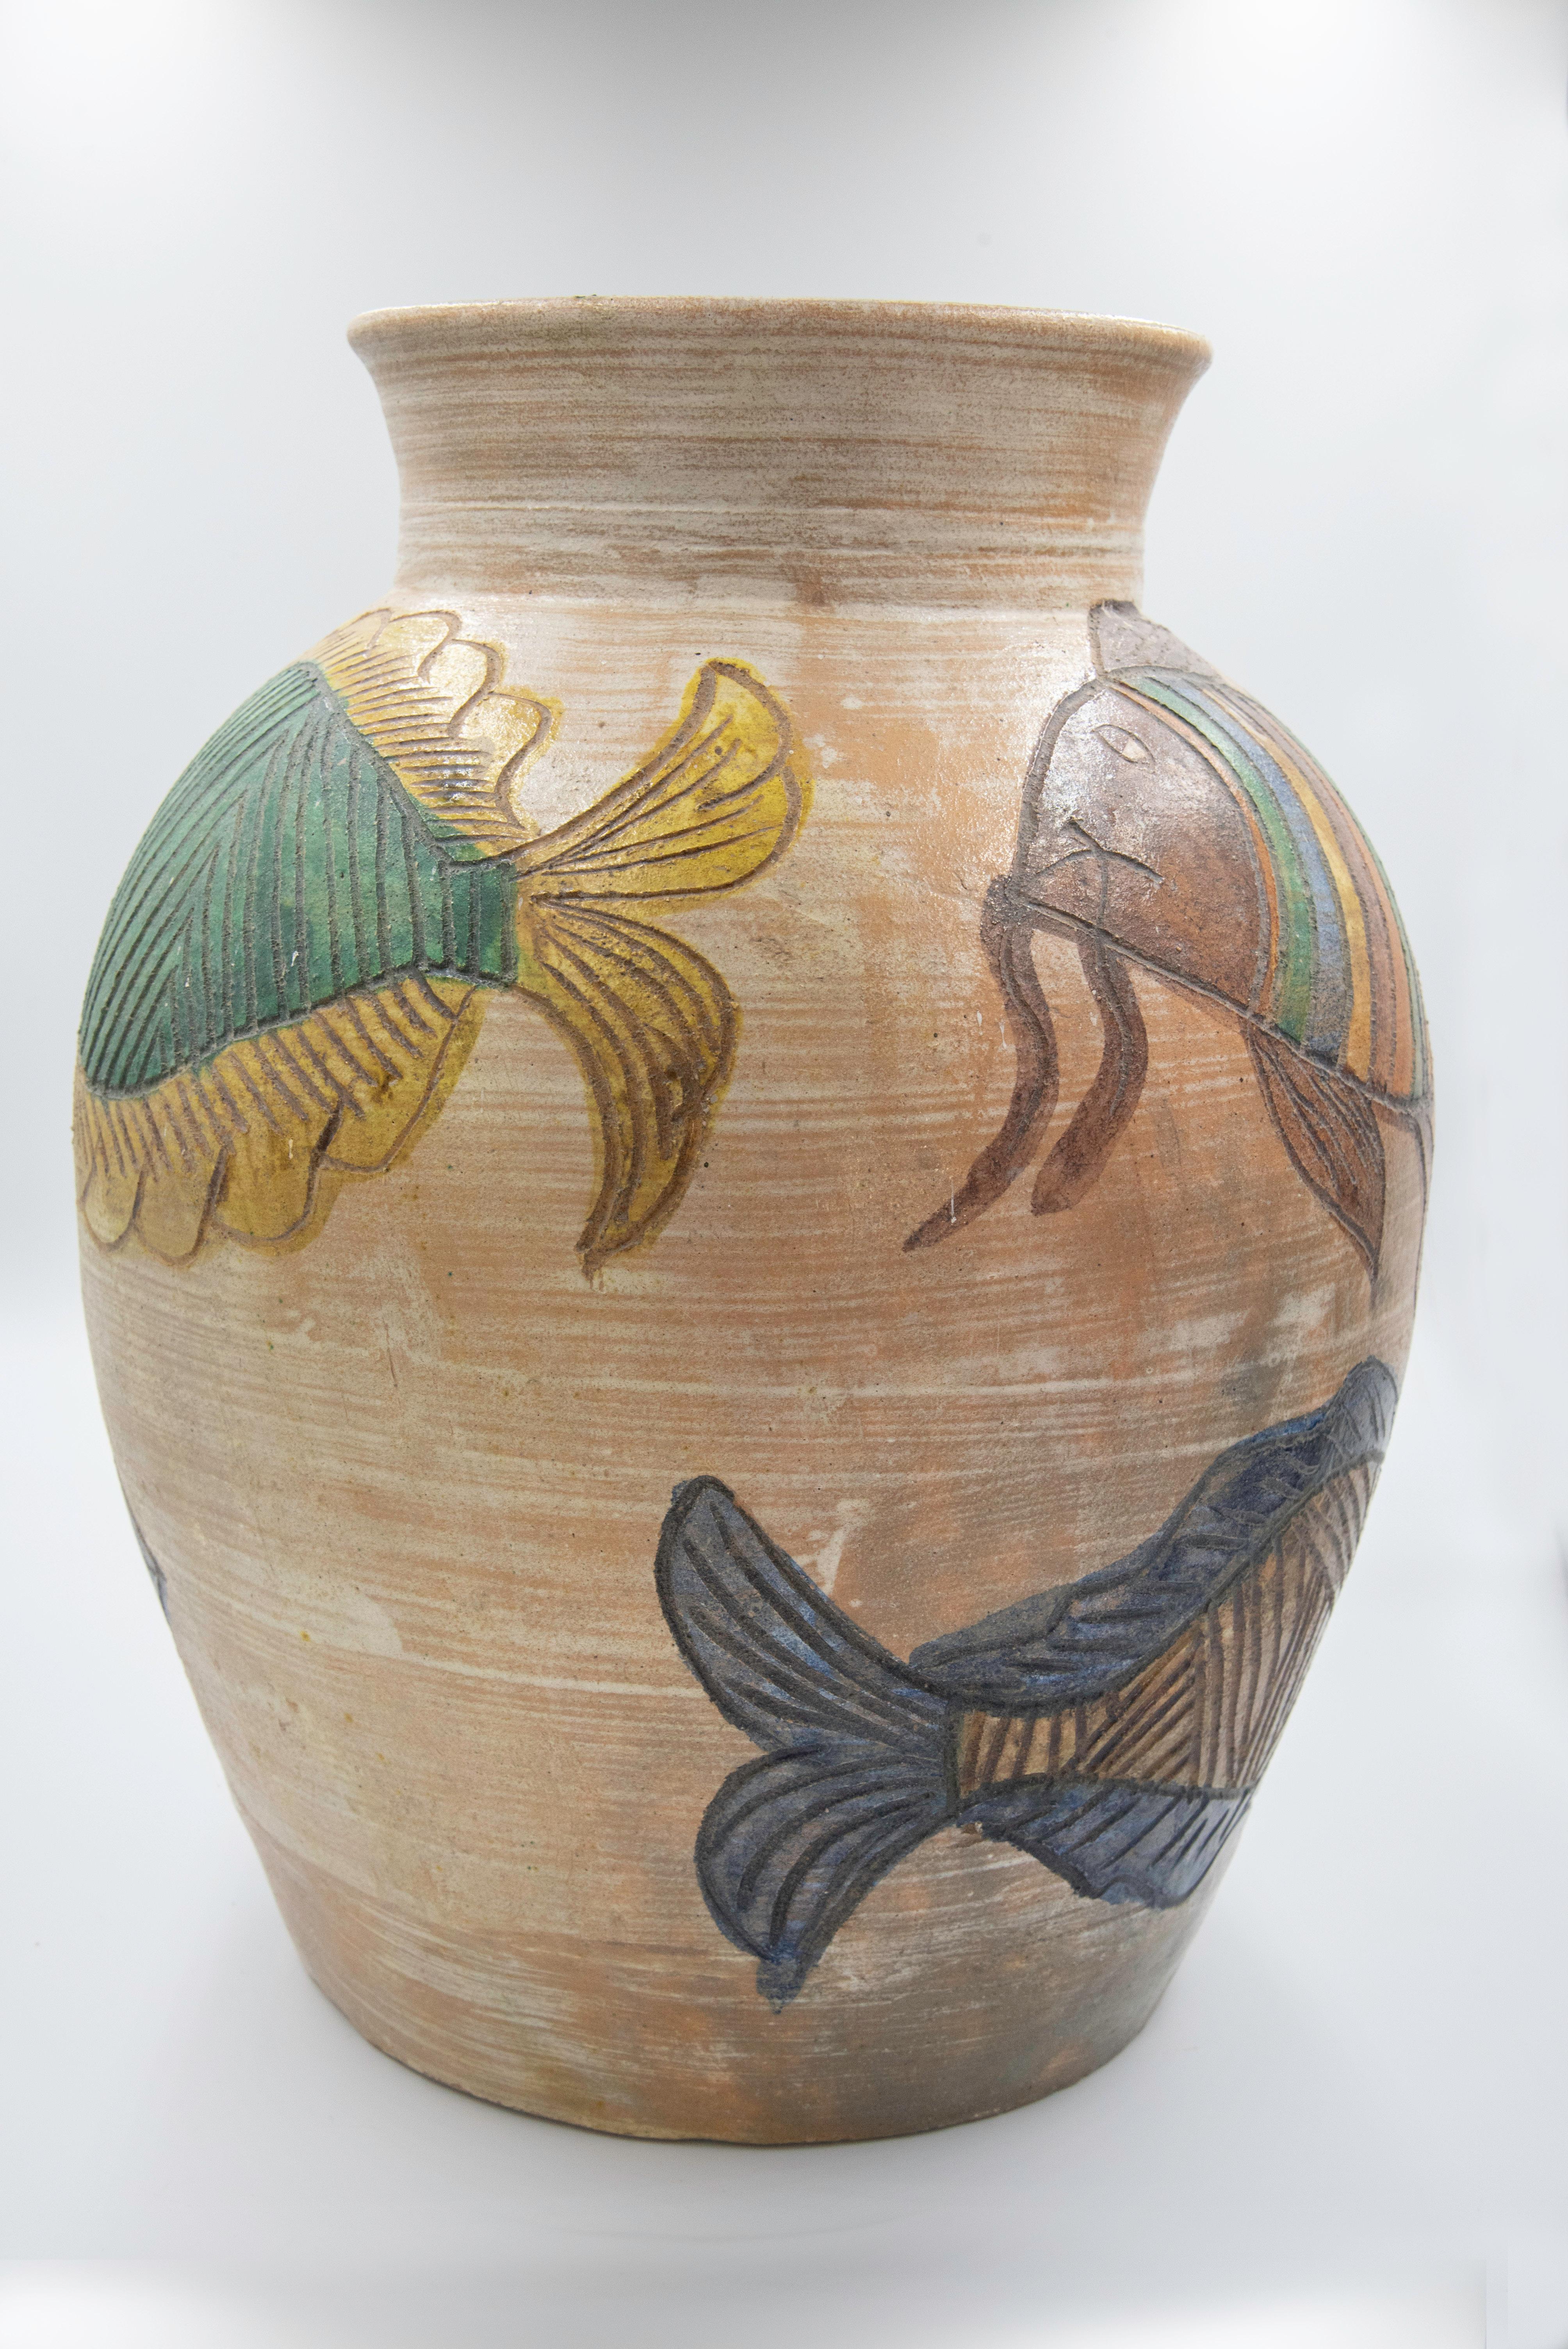 Dolores Porras Enríquez is widely known throughout Mexico and the world for being the creator of a technique rooted in the land of Oaxaca: pottery in natural color, glazed and decorated with floral motifs and colorful animals 

In the early 1980s,